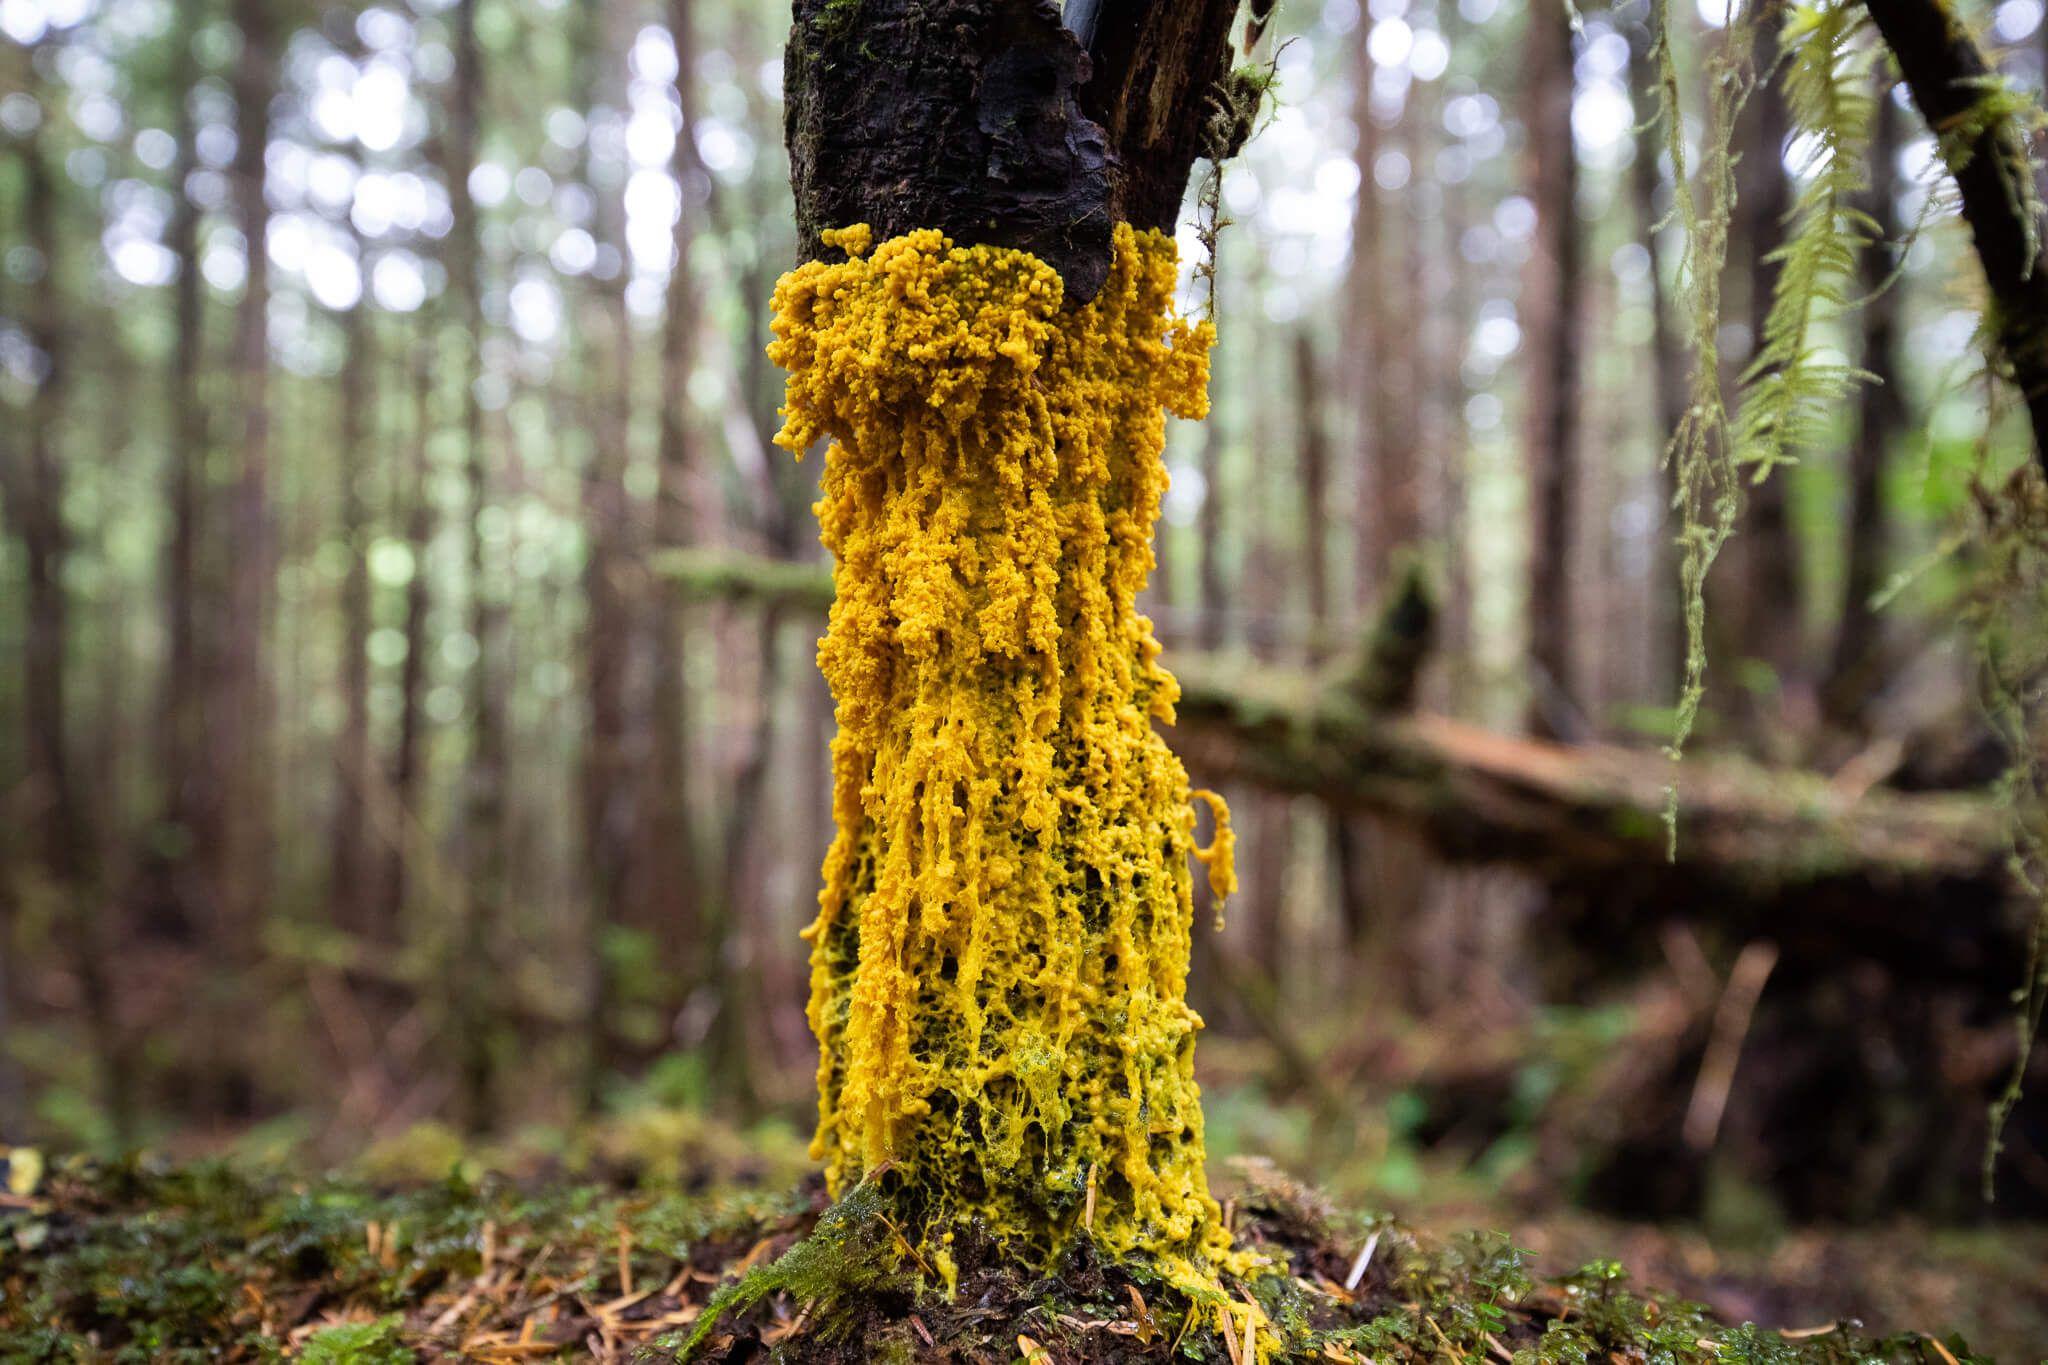 Despite their unappealing name, slime moulds aren’t actually mould or even fungi, but rather amebae, single-celled organisms with the ability to move and alter their shape. What makes these colourful organisms interesting? Their scientifically proven ability to map the best route to food.

Photo: TJ Watt   Location: Vancouver Island, BC, Canada